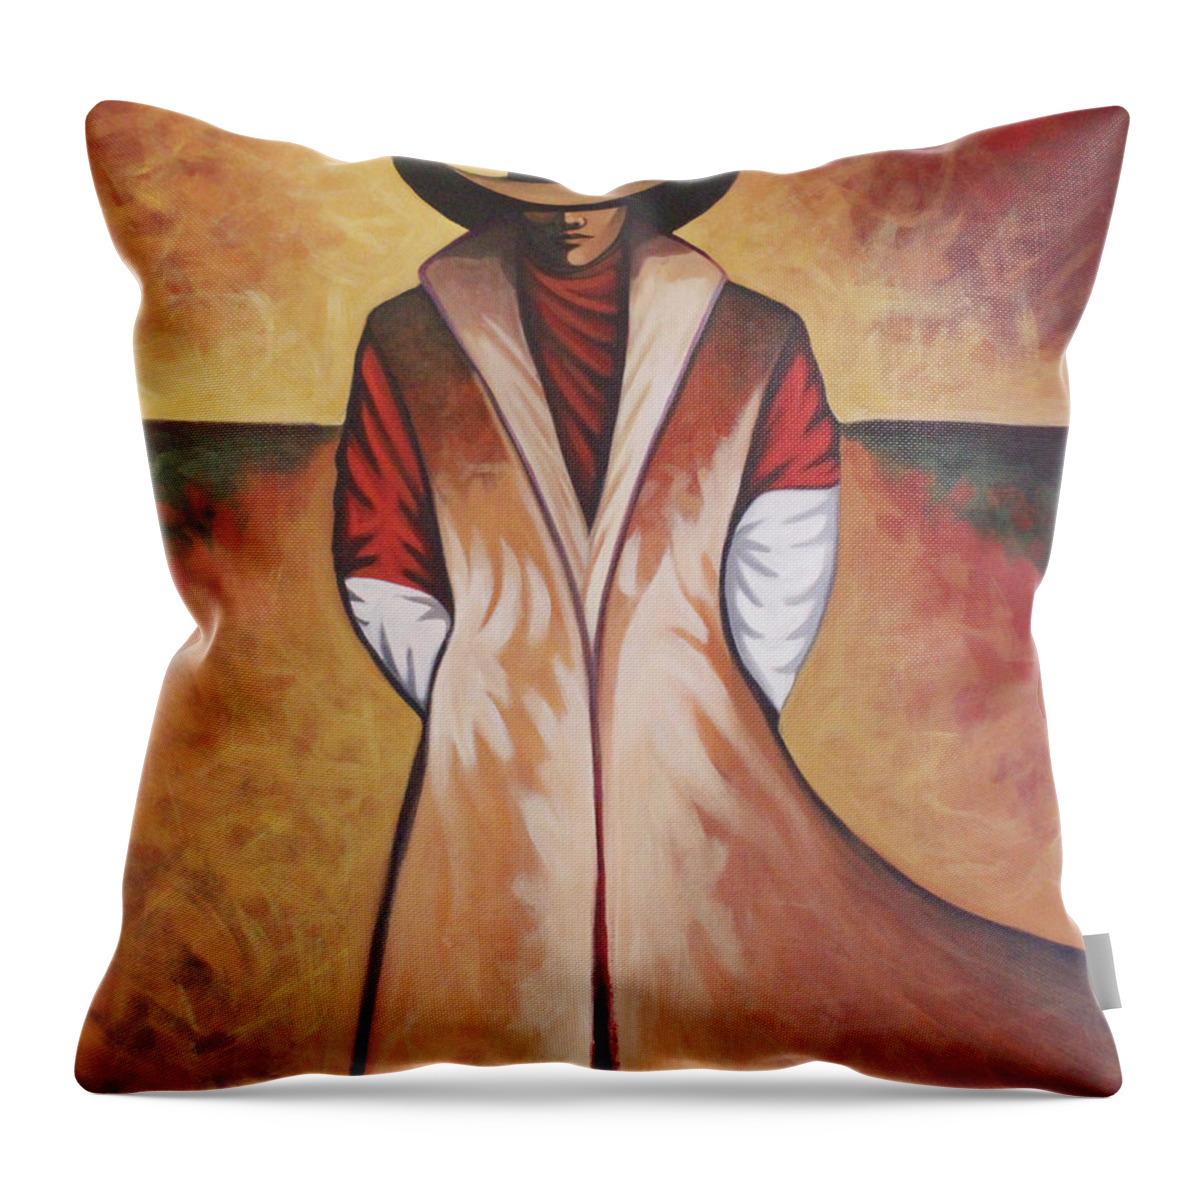  Throw Pillow featuring the painting Astract Cowboy #4 by Lance Headlee